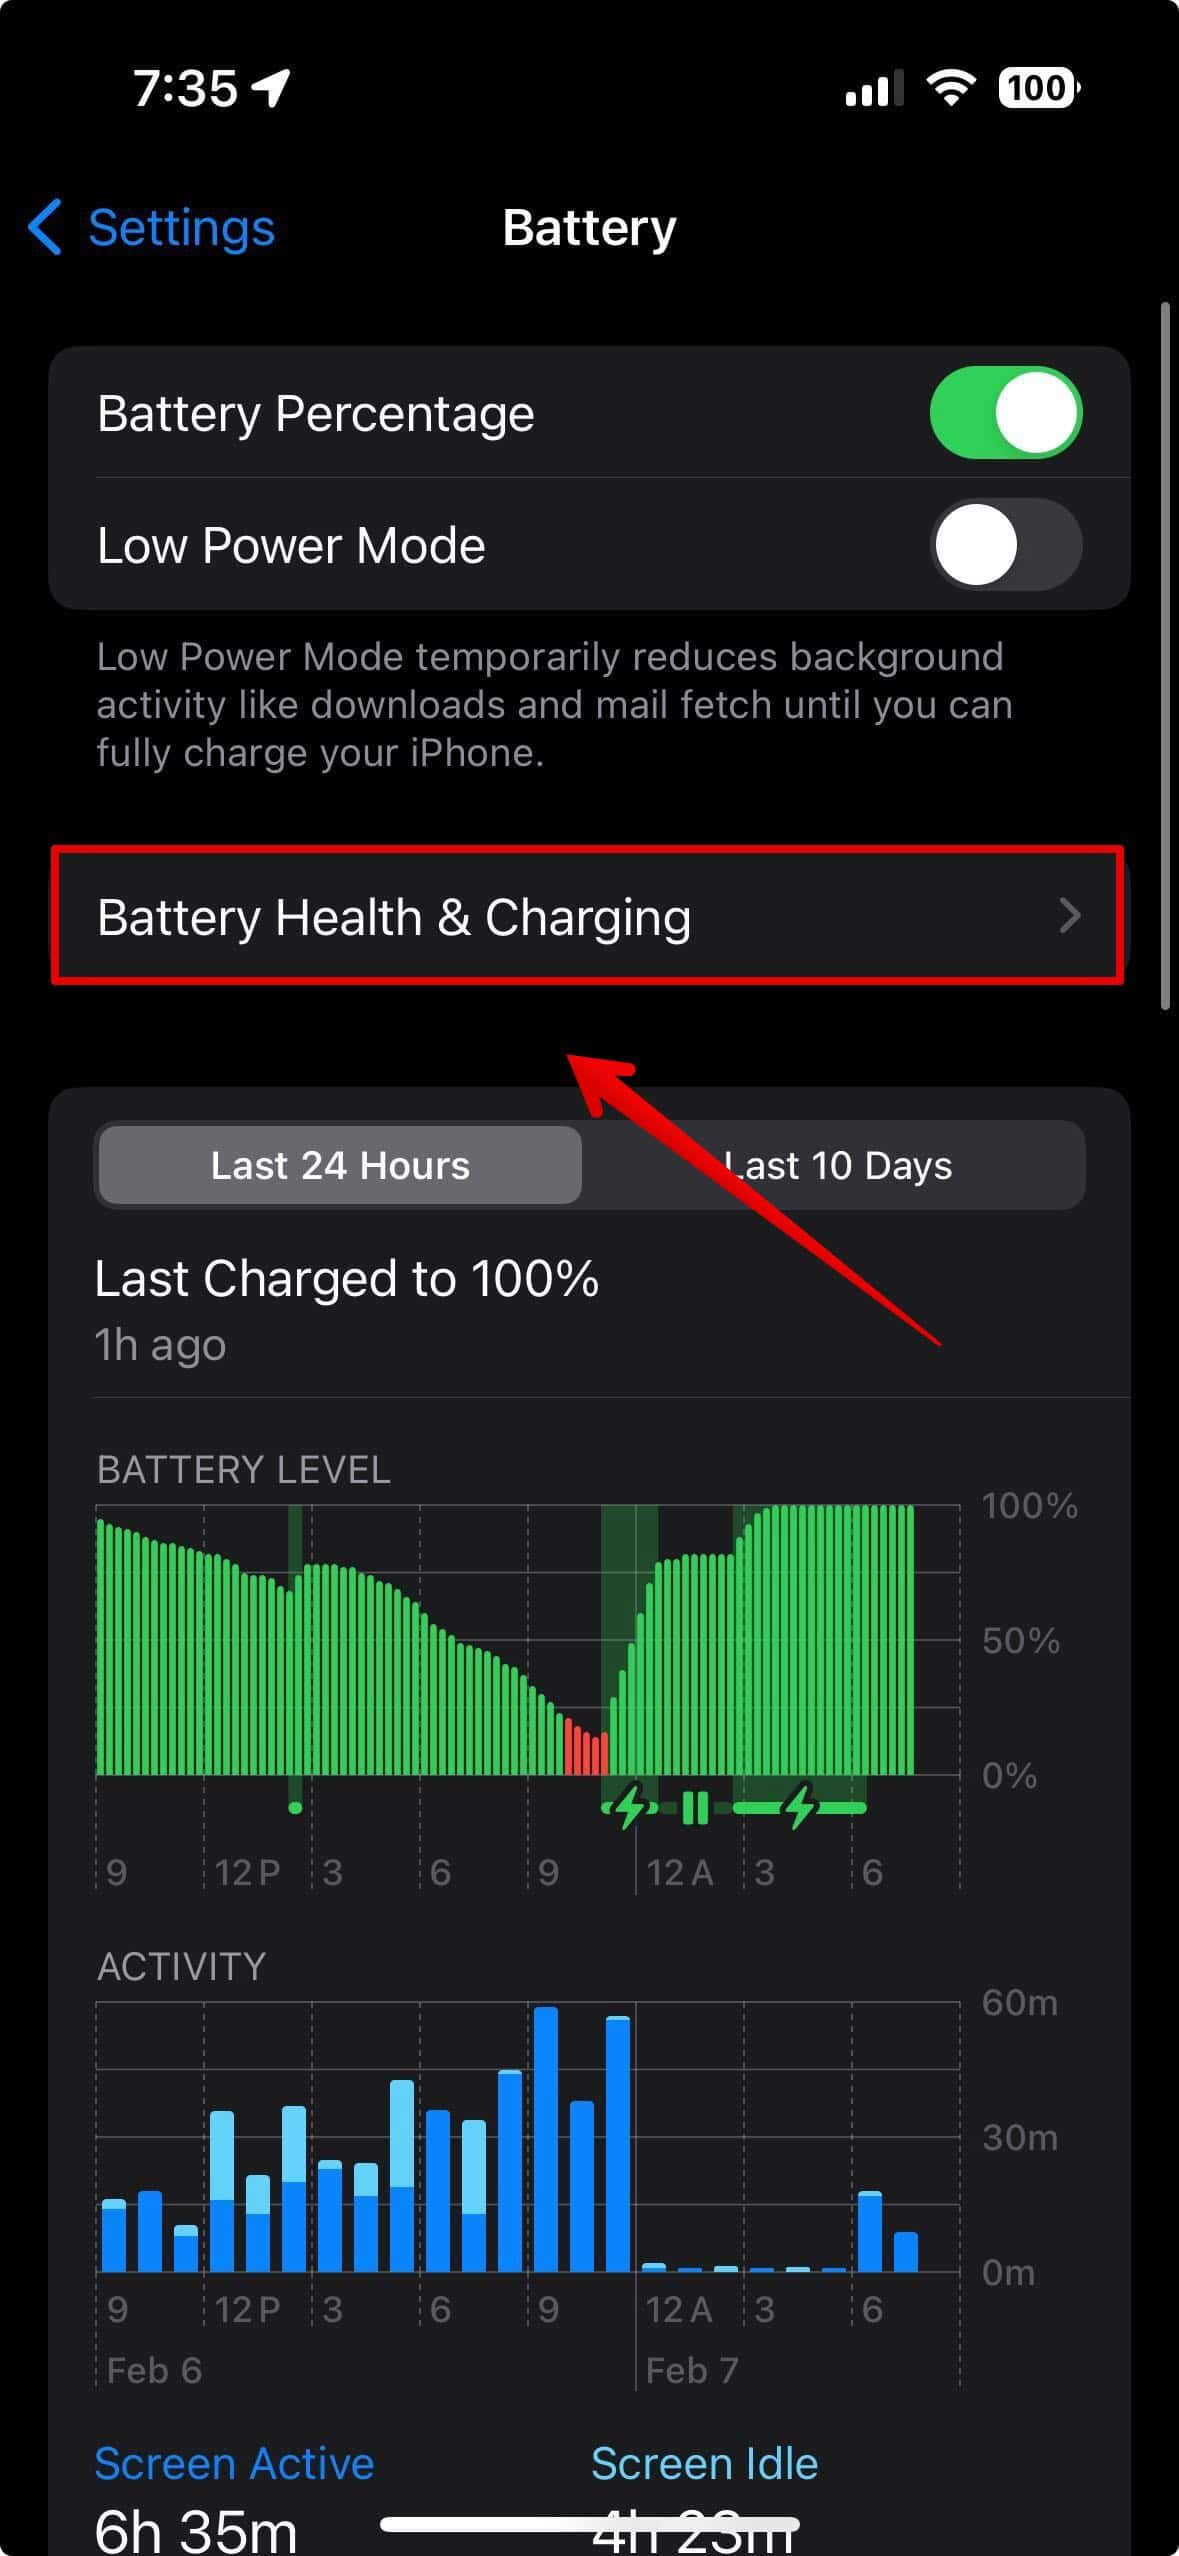 Tap on Battery Health & Charging